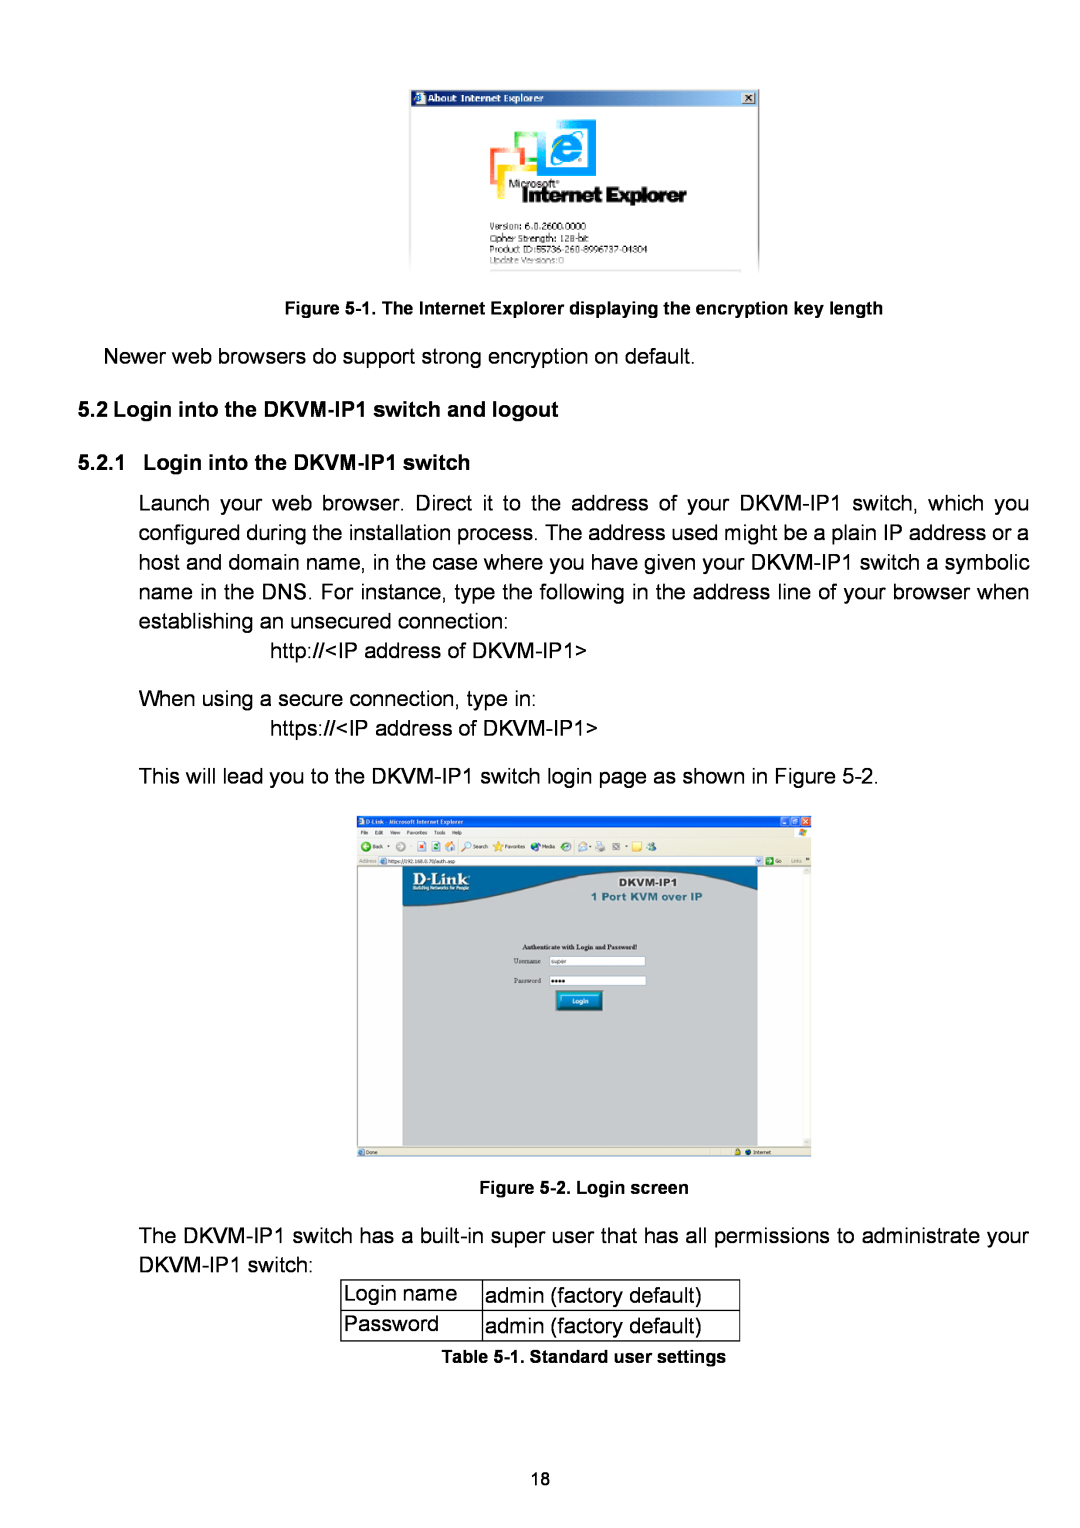 D-Link manual Login into the DKVM-IP1 switch and logout, 2. Login screen, 1. Standard user settings 